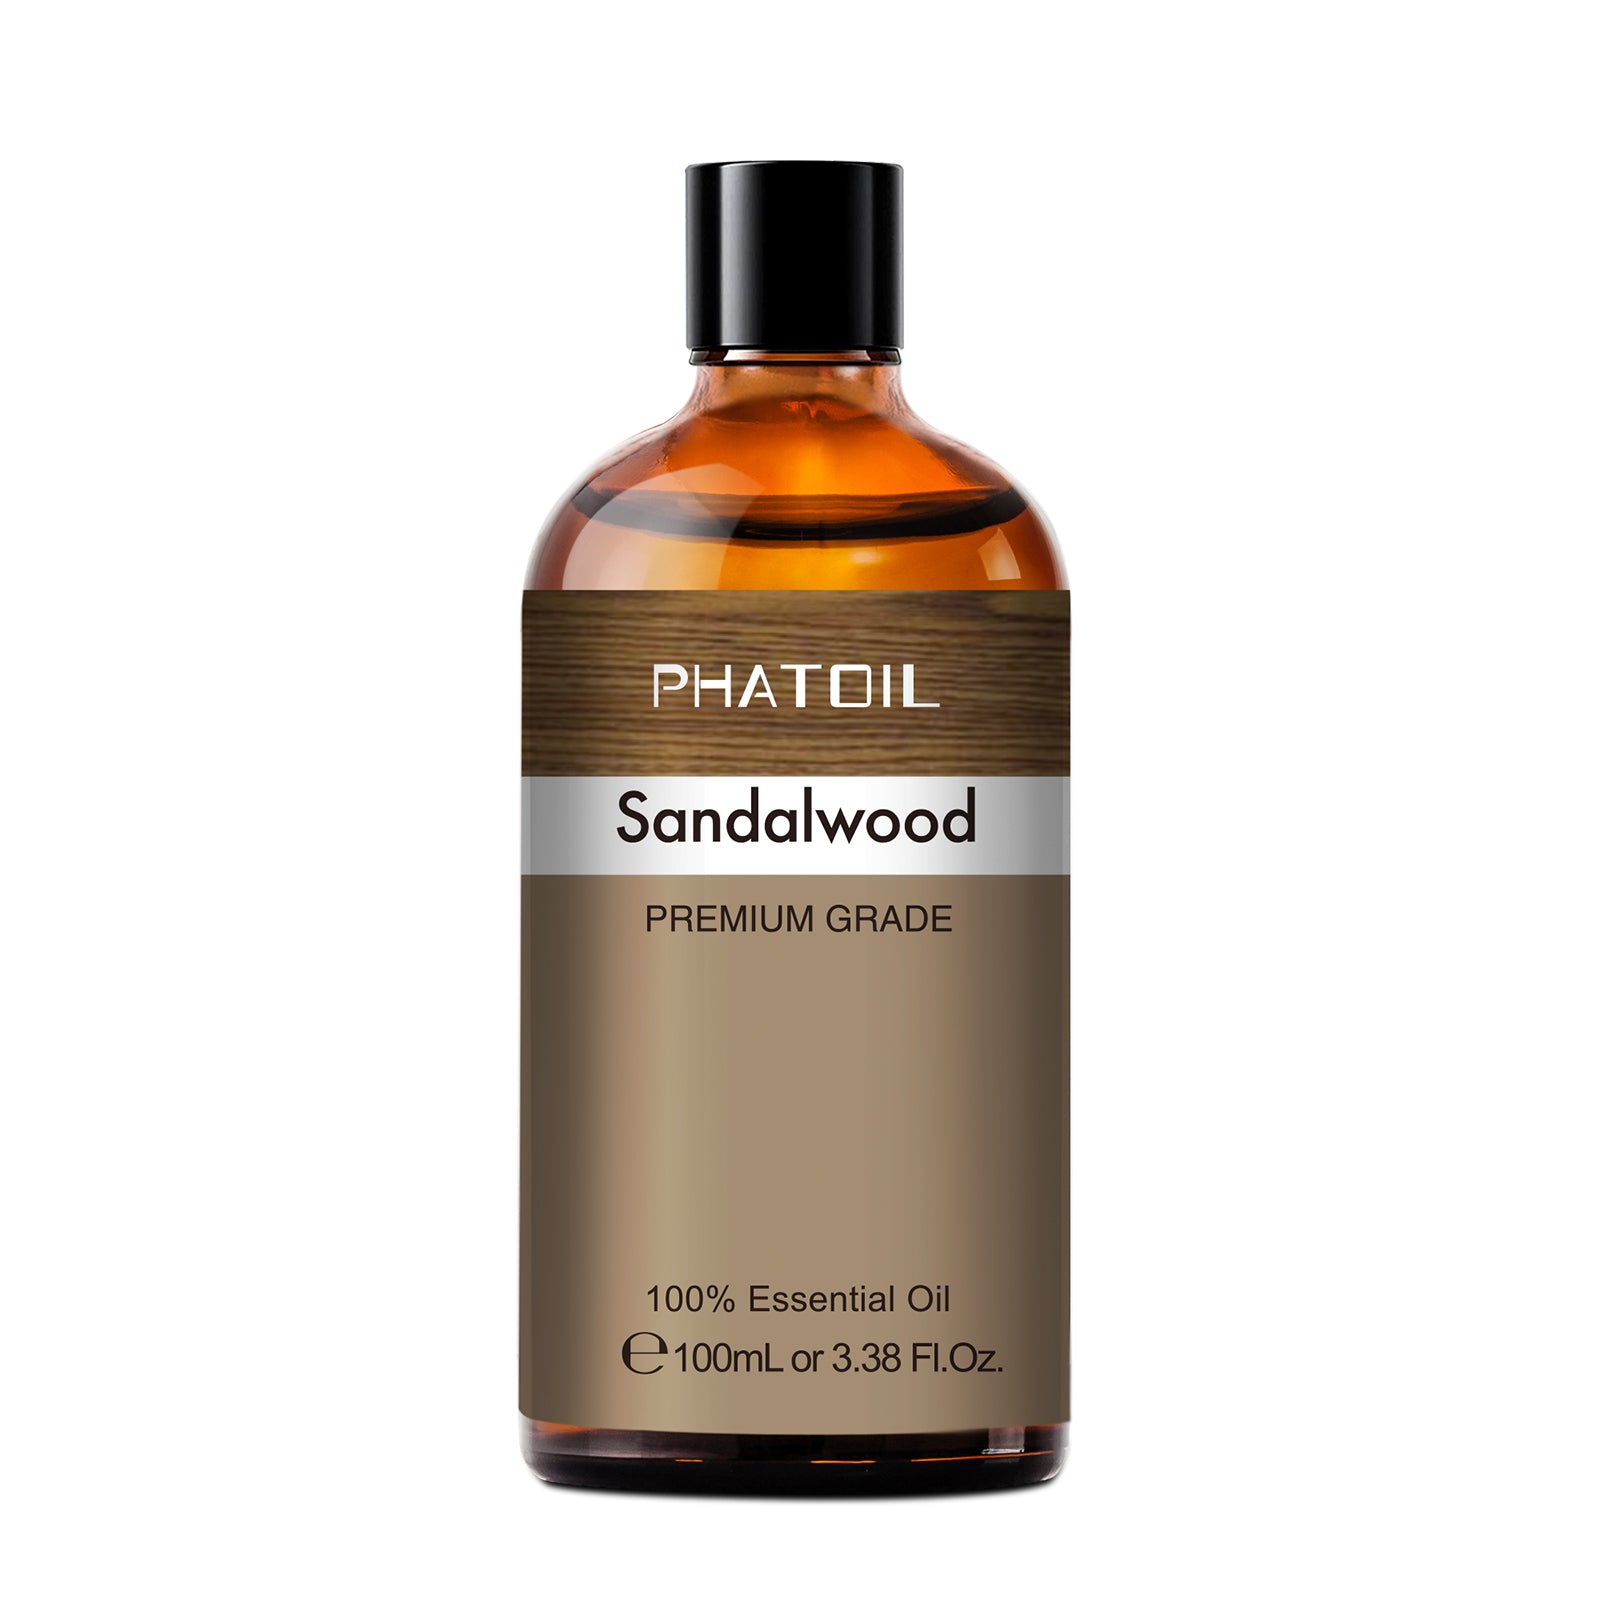 Sandalwood Oils,Pure Sandalwood Oil,Sandalwood Essential Oil Manufacturers